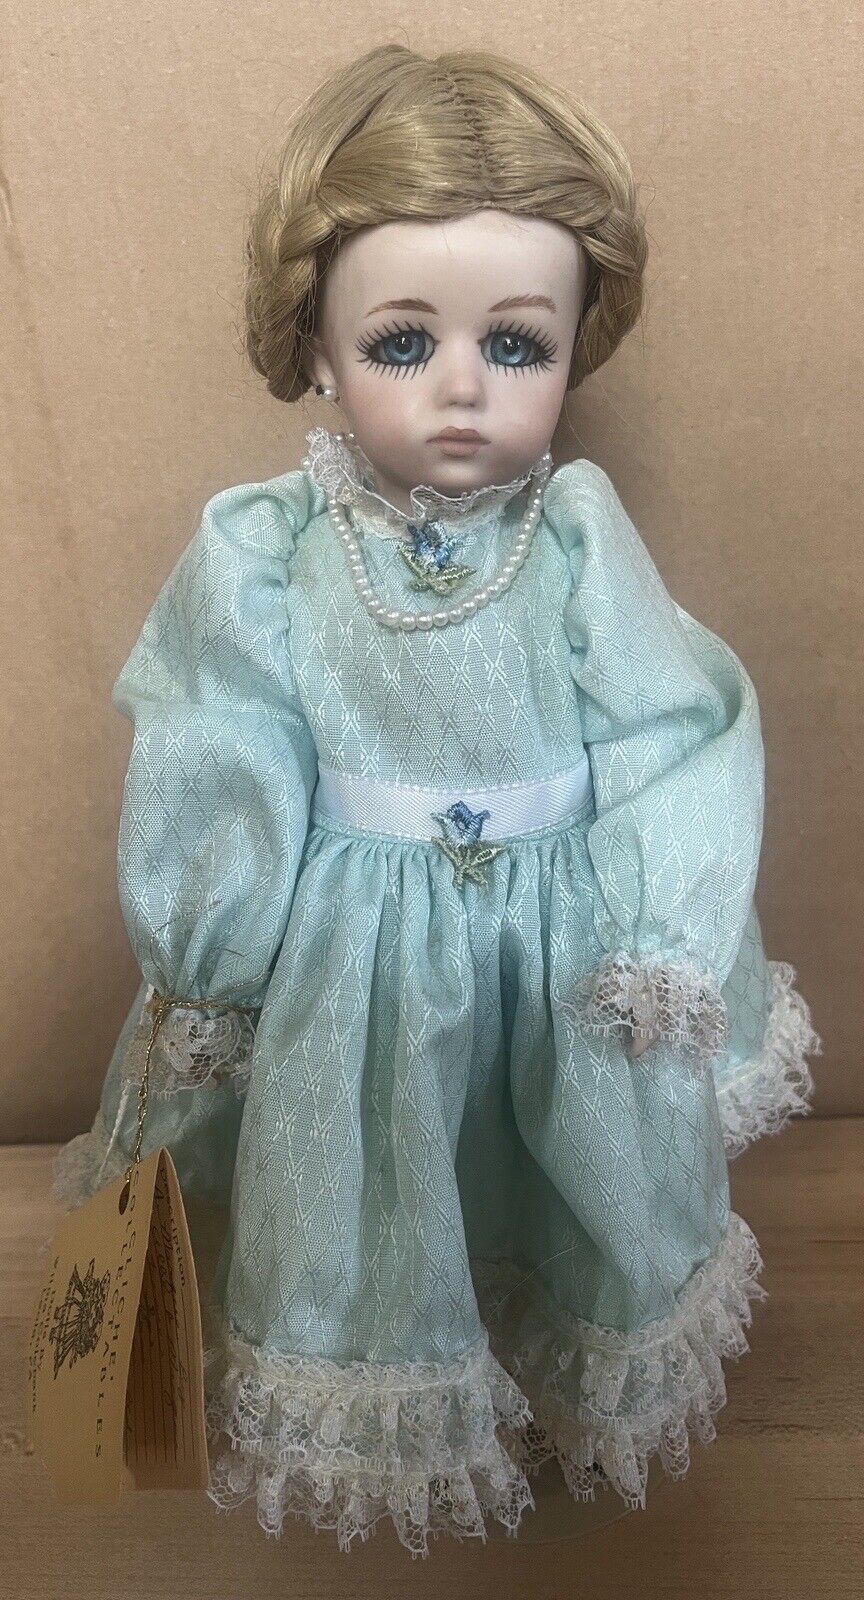 A. Marque By Albert Marque France. French Jointed Body Beautiful Doll